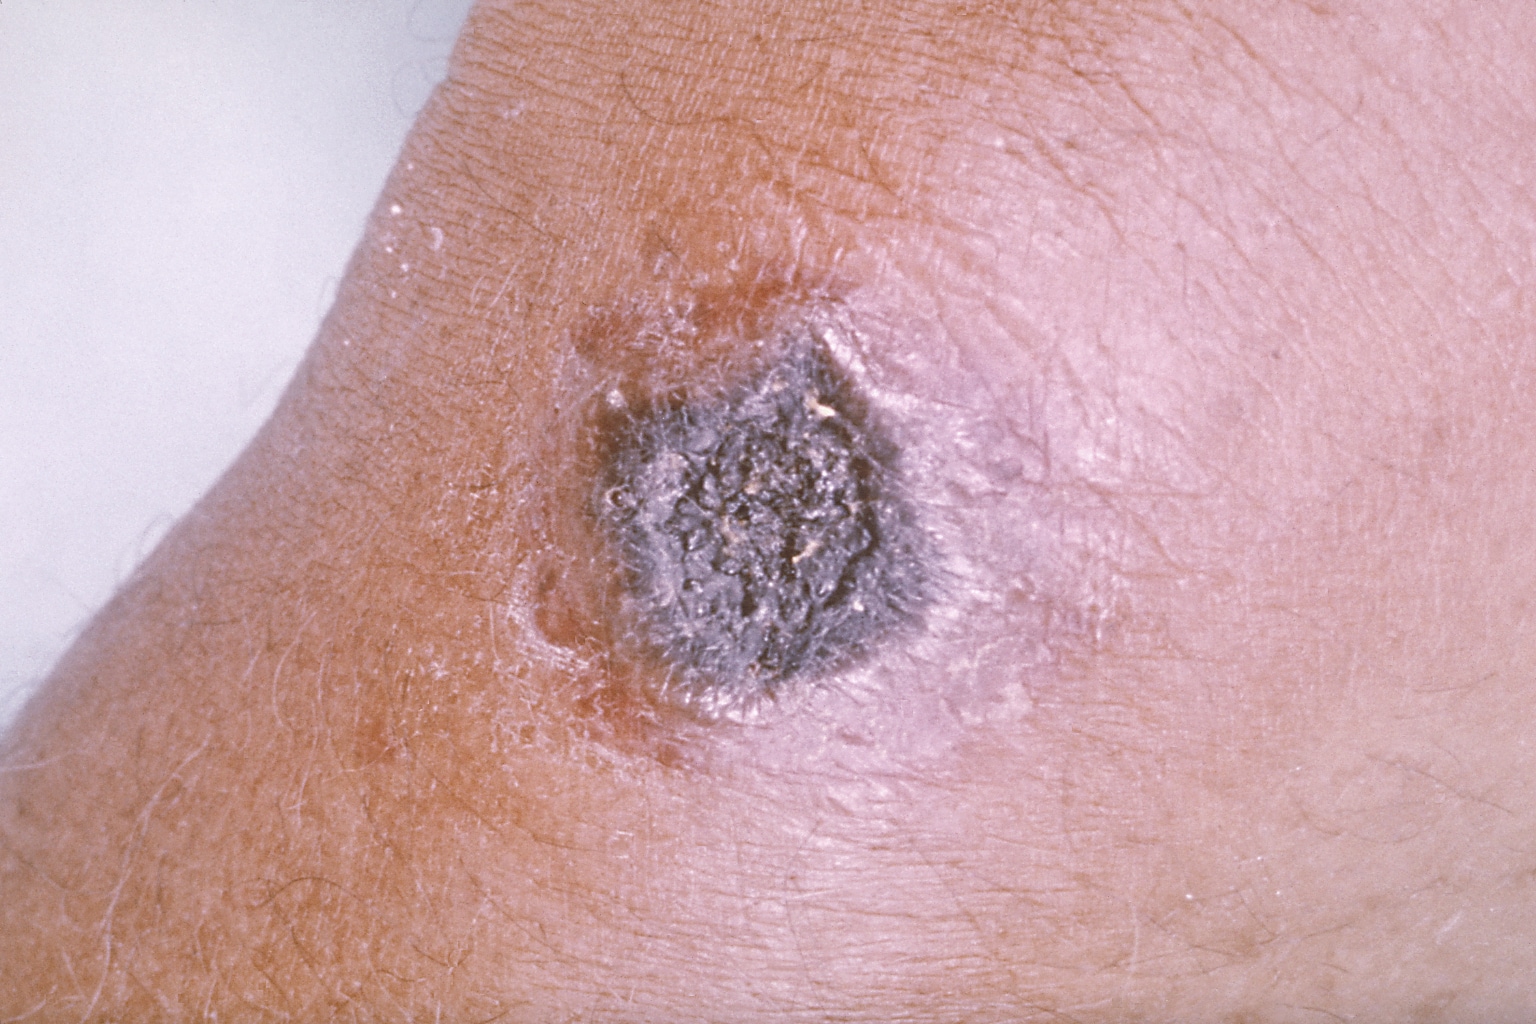 Black sore on an arm showing cutaneous anthrax